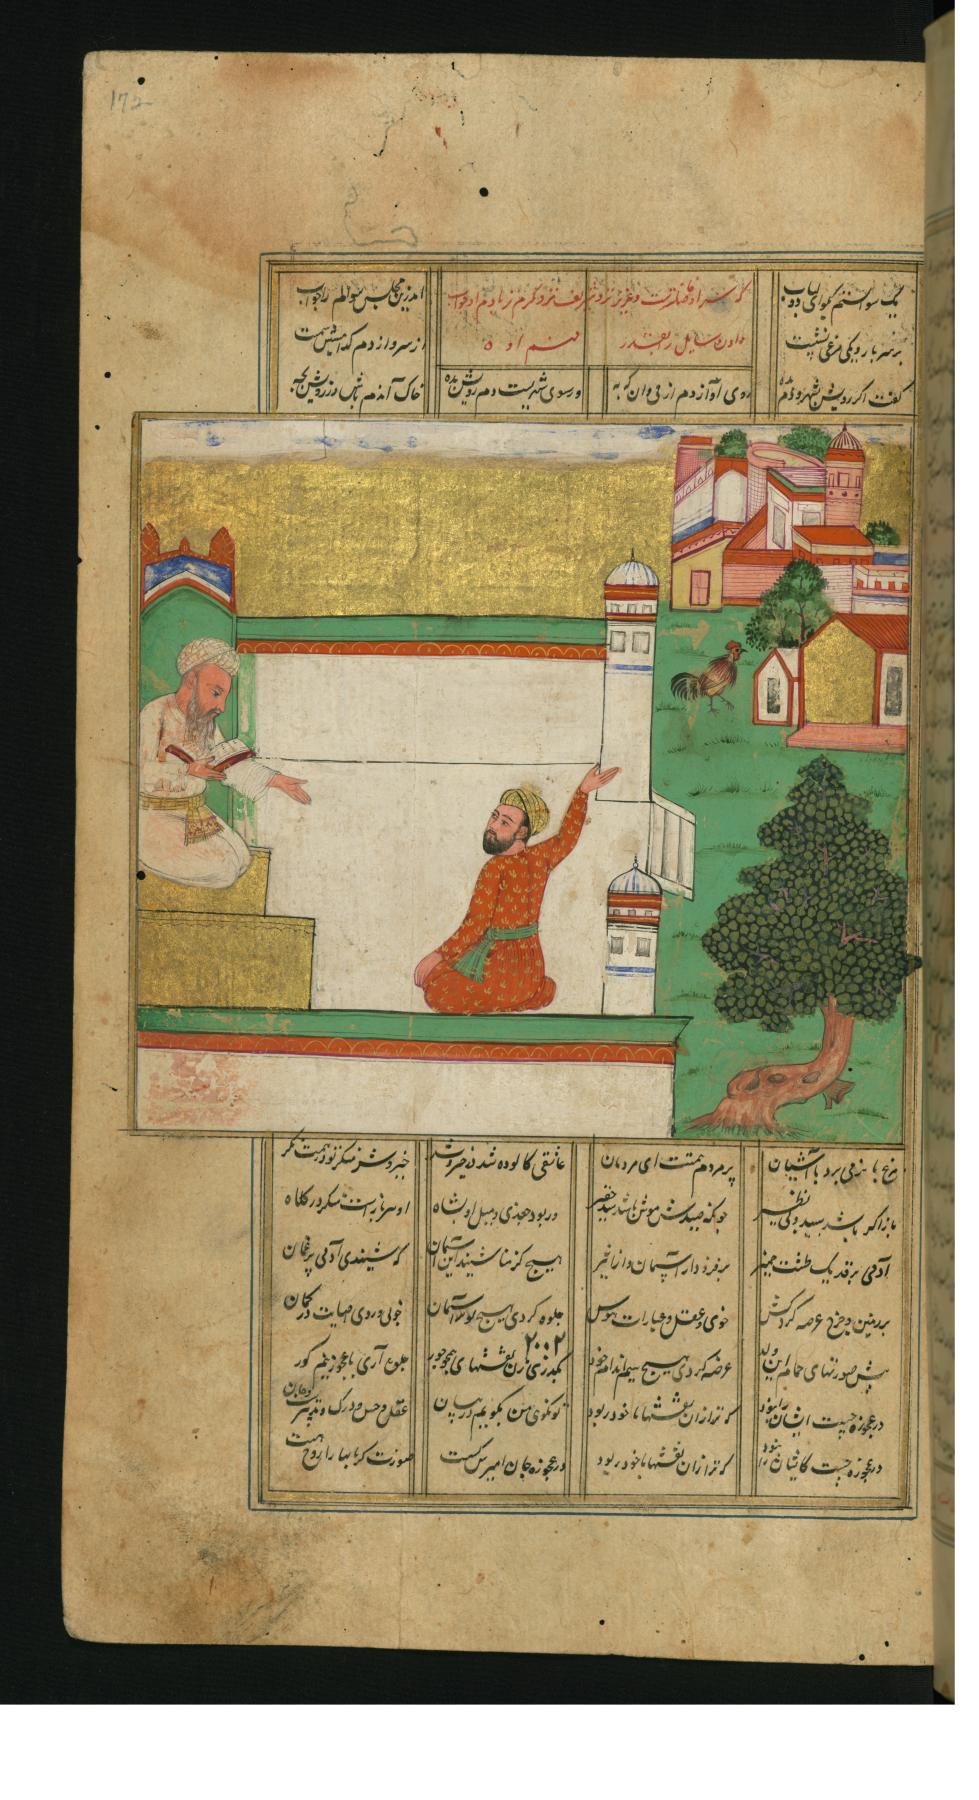 Image for A Man Questions a Preacher about the Meaning of the Direction a Rooster Faces While on the Roof